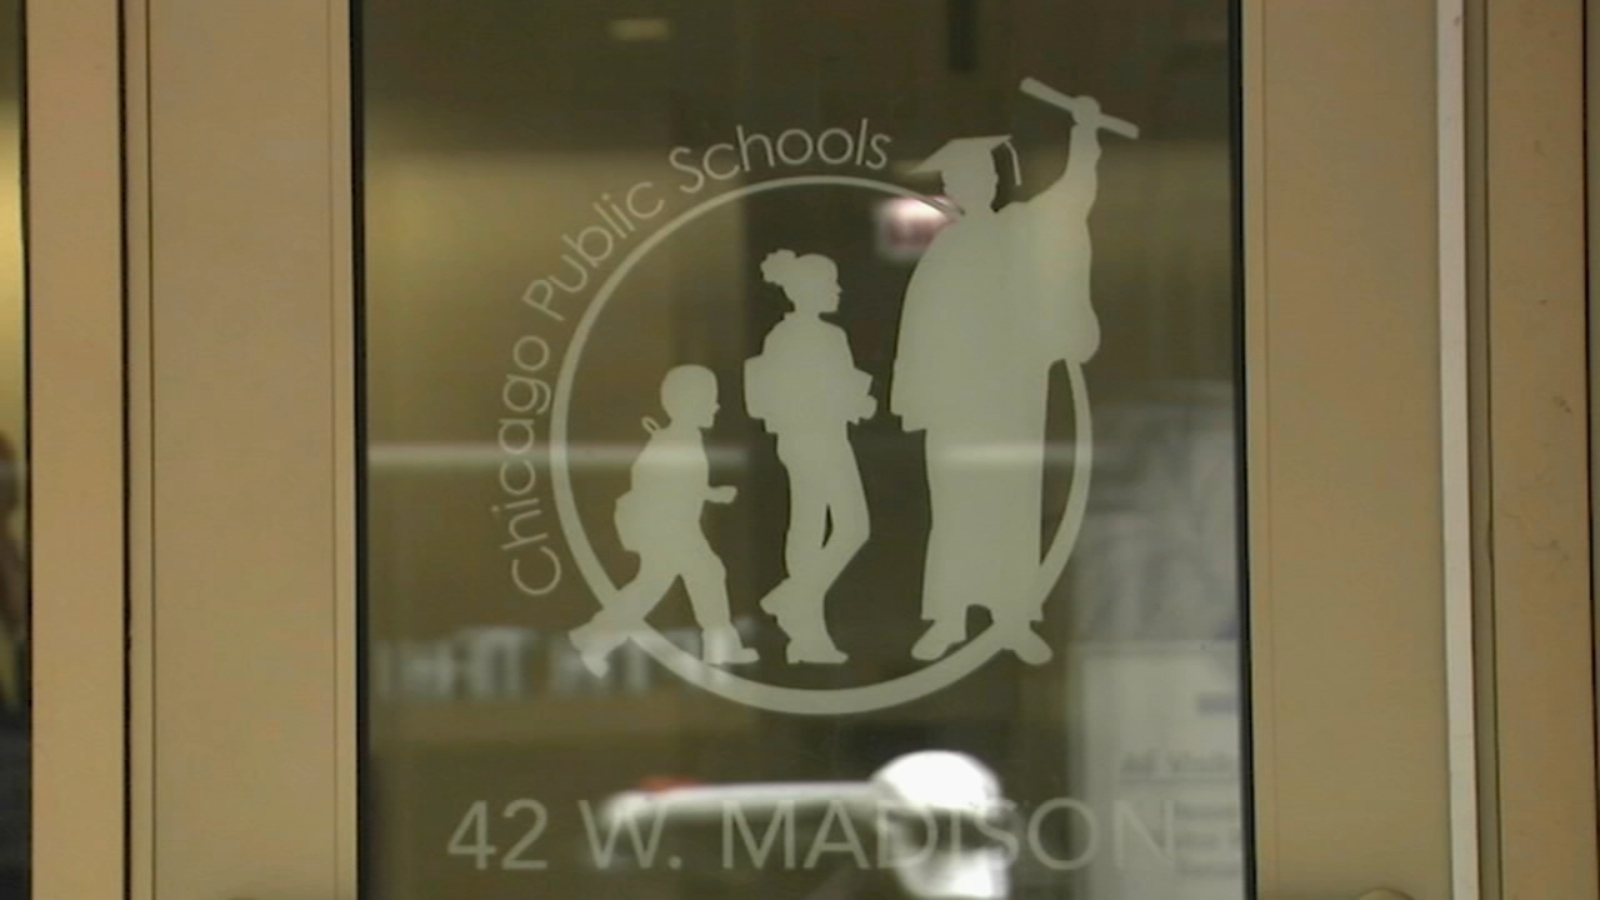 Will Chicago Public Schools Move To An Elected School Board